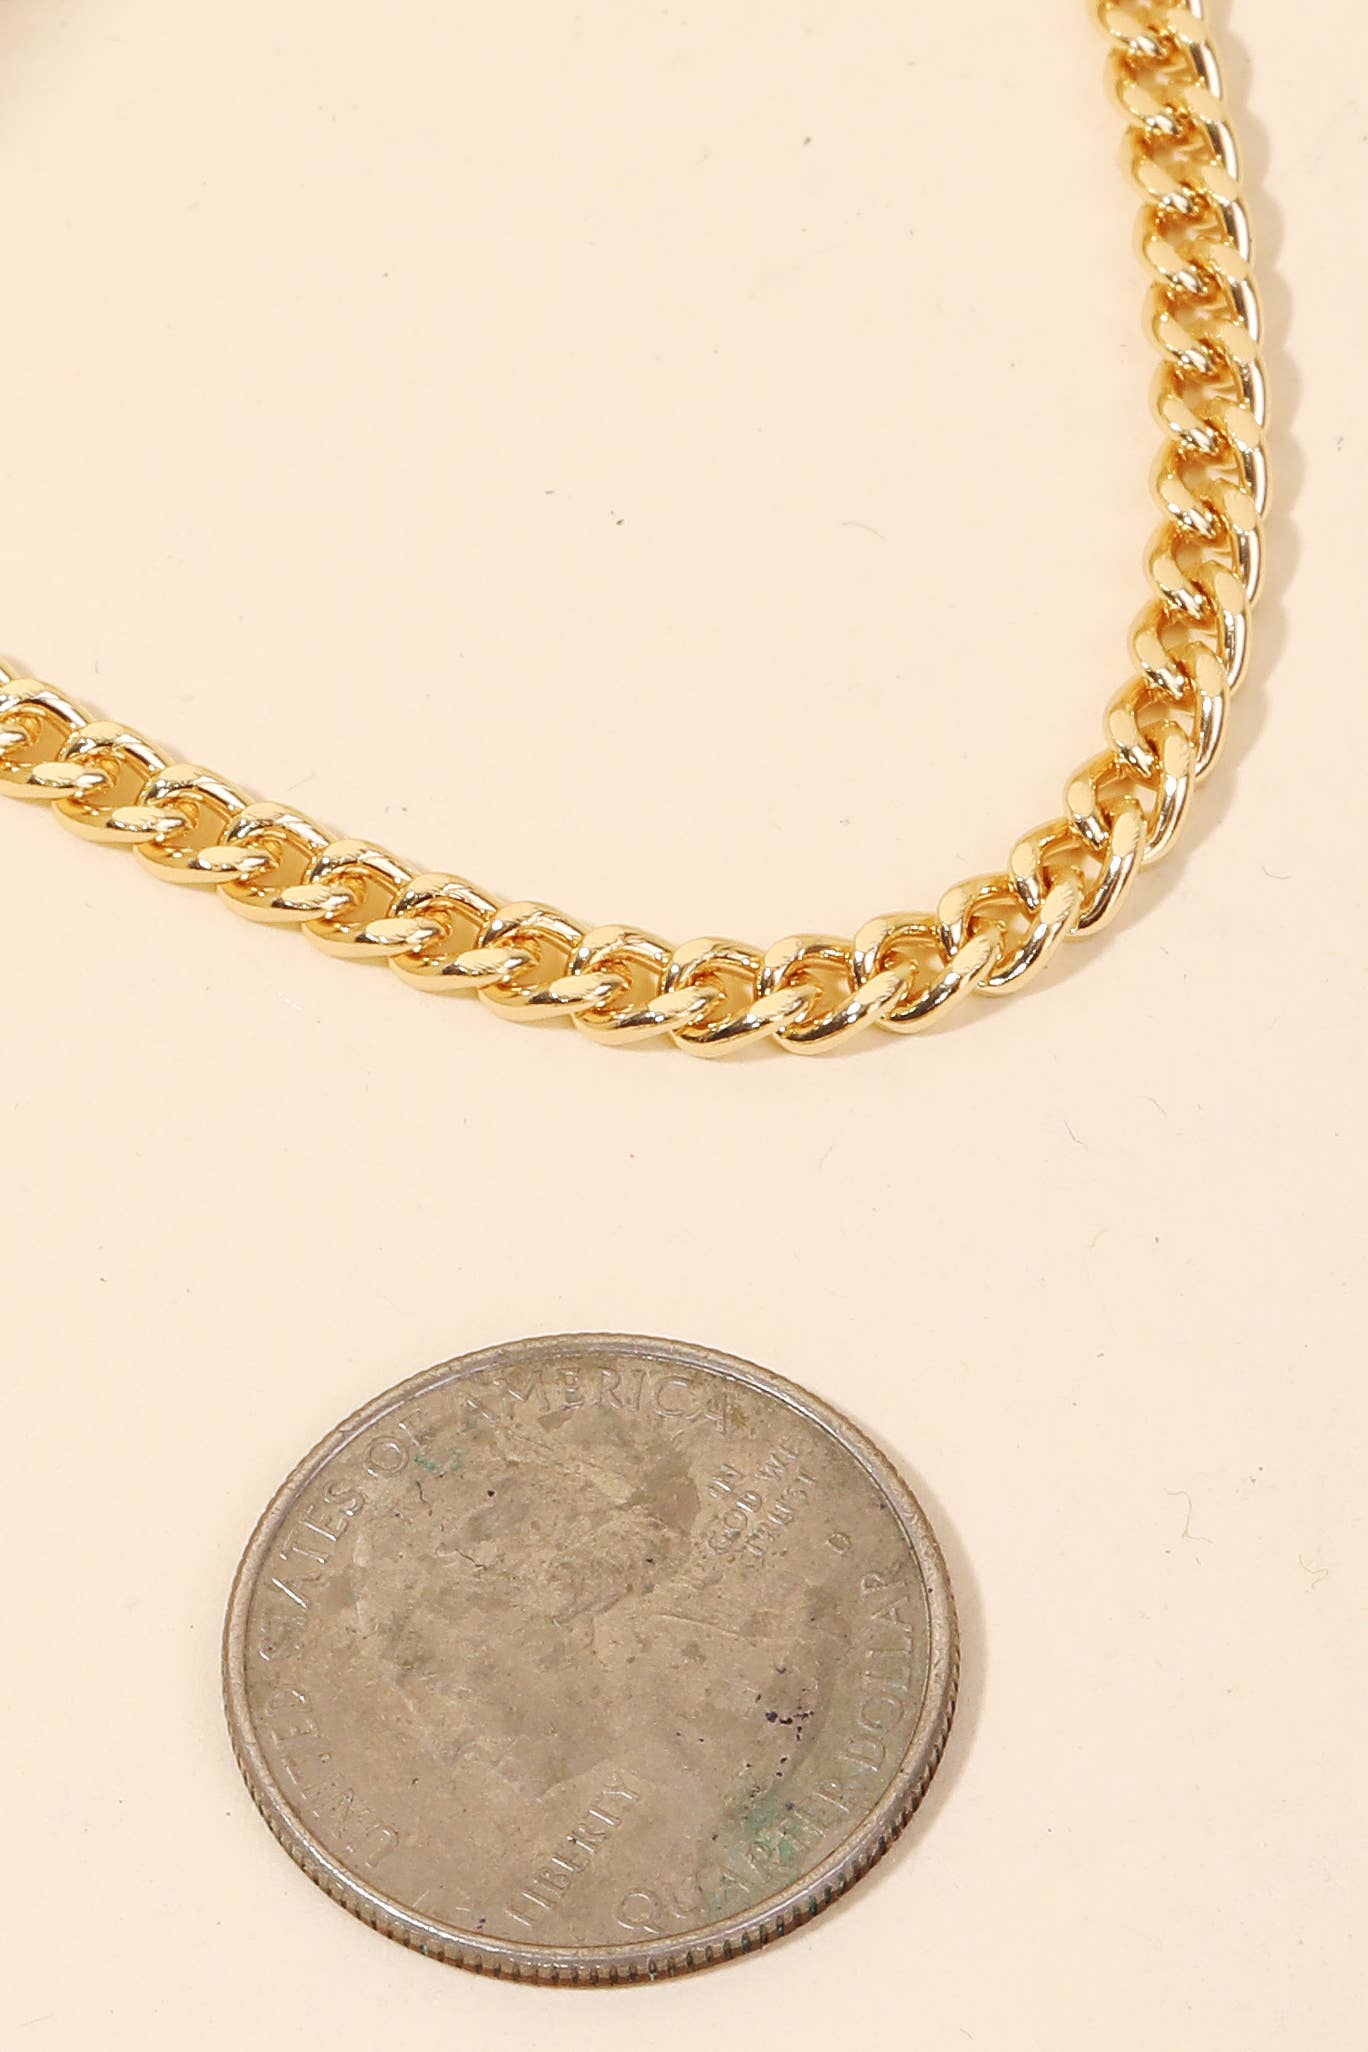 Small Cuban Chain Necklace.